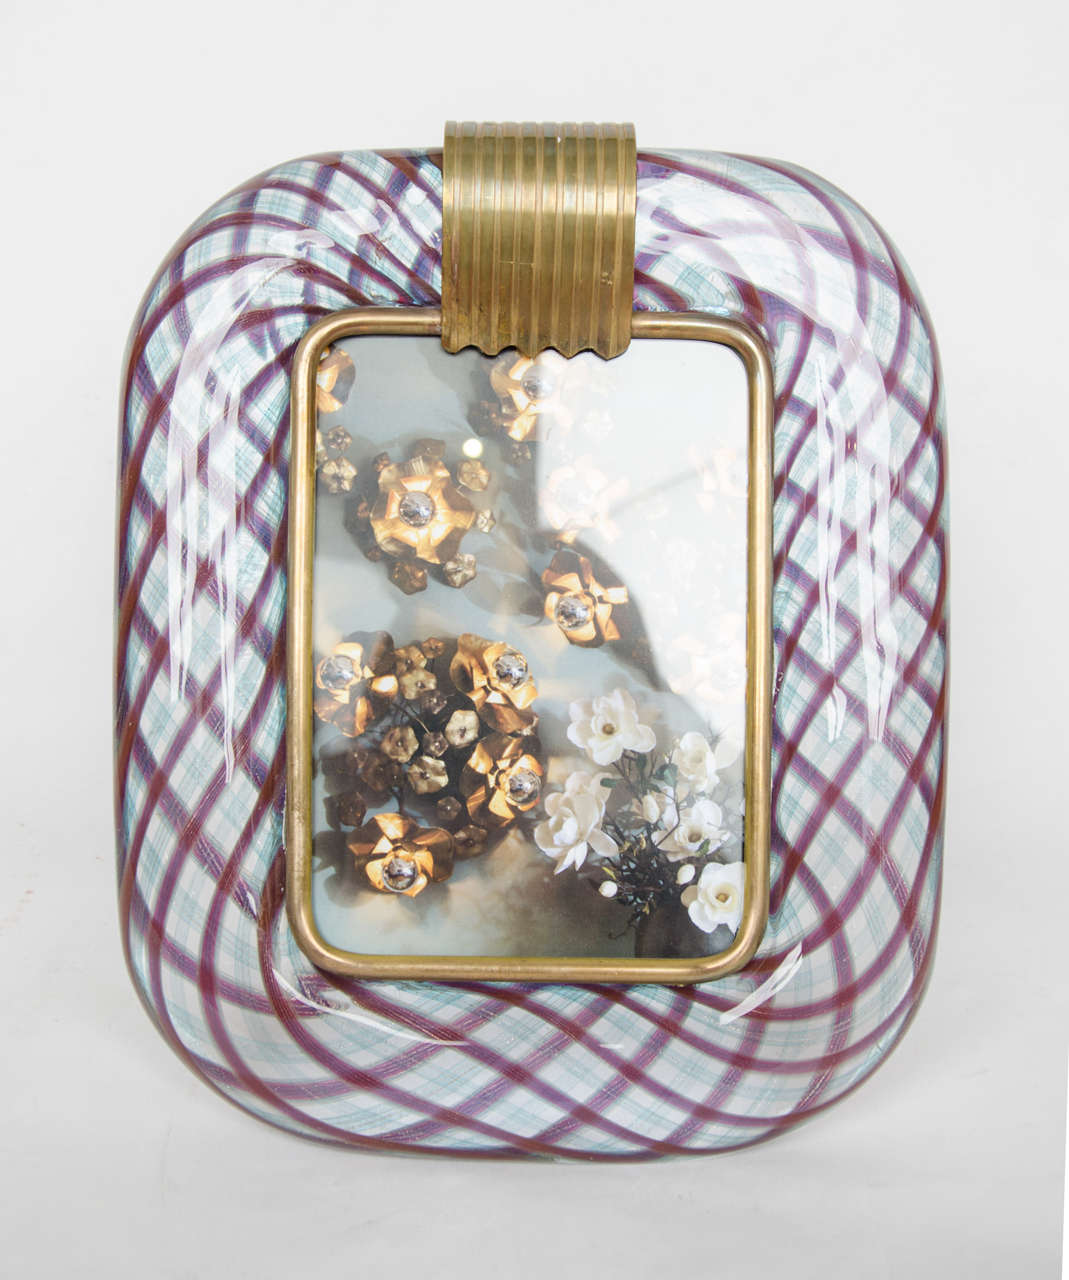 Smooth clear glass patterned with purple and subtle blue design. Brass surround details and support. Signed: for Venini.